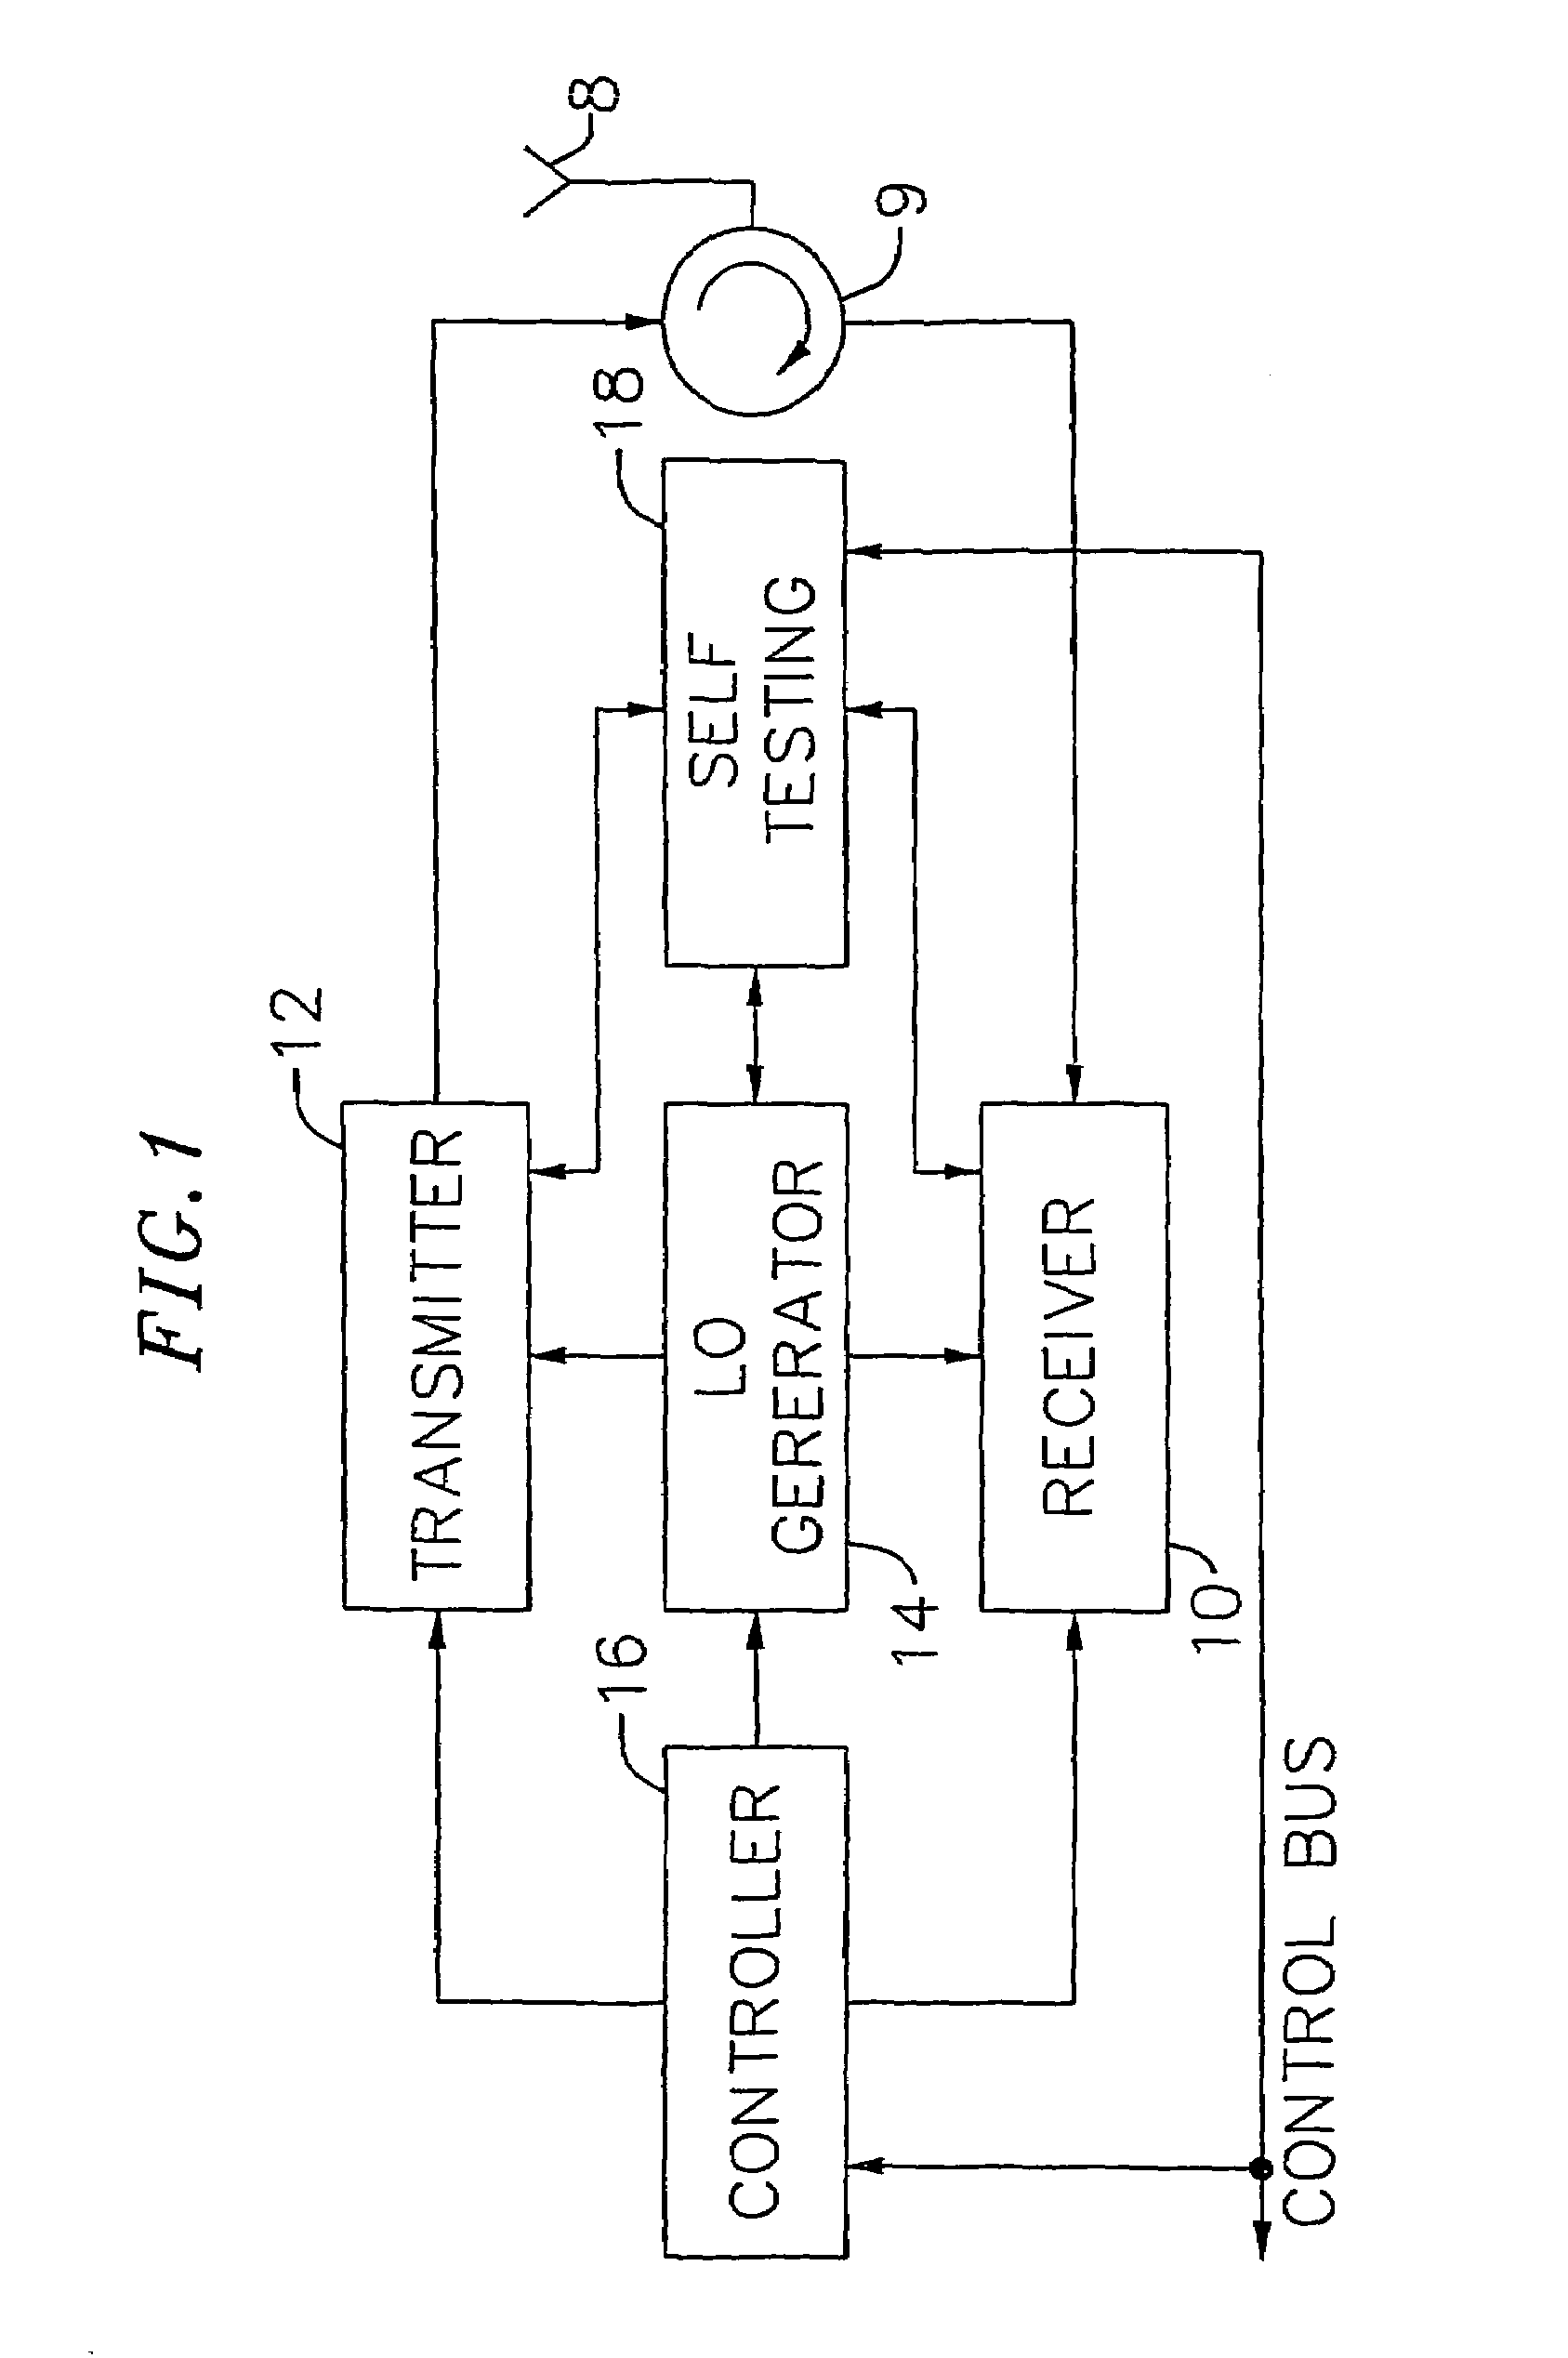 Adaptive radio transceiver with a bandpass filter